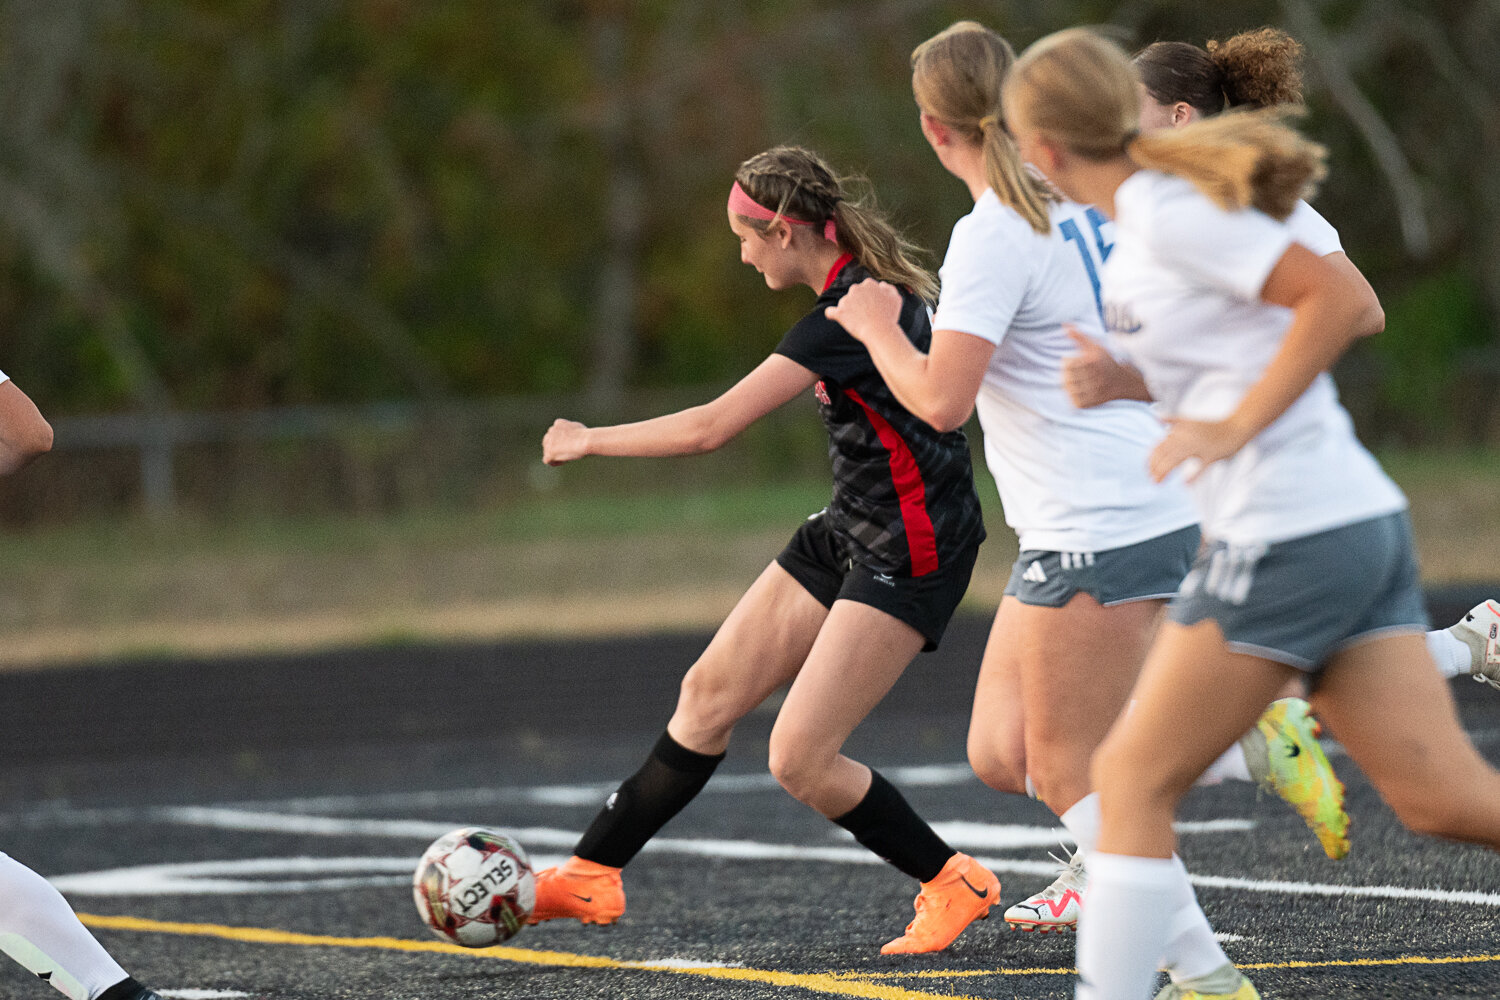 Callie Smith fires off a shot during Tenino's 0-0 tie against Adna on Sept. 14 at Beaver Stadium.